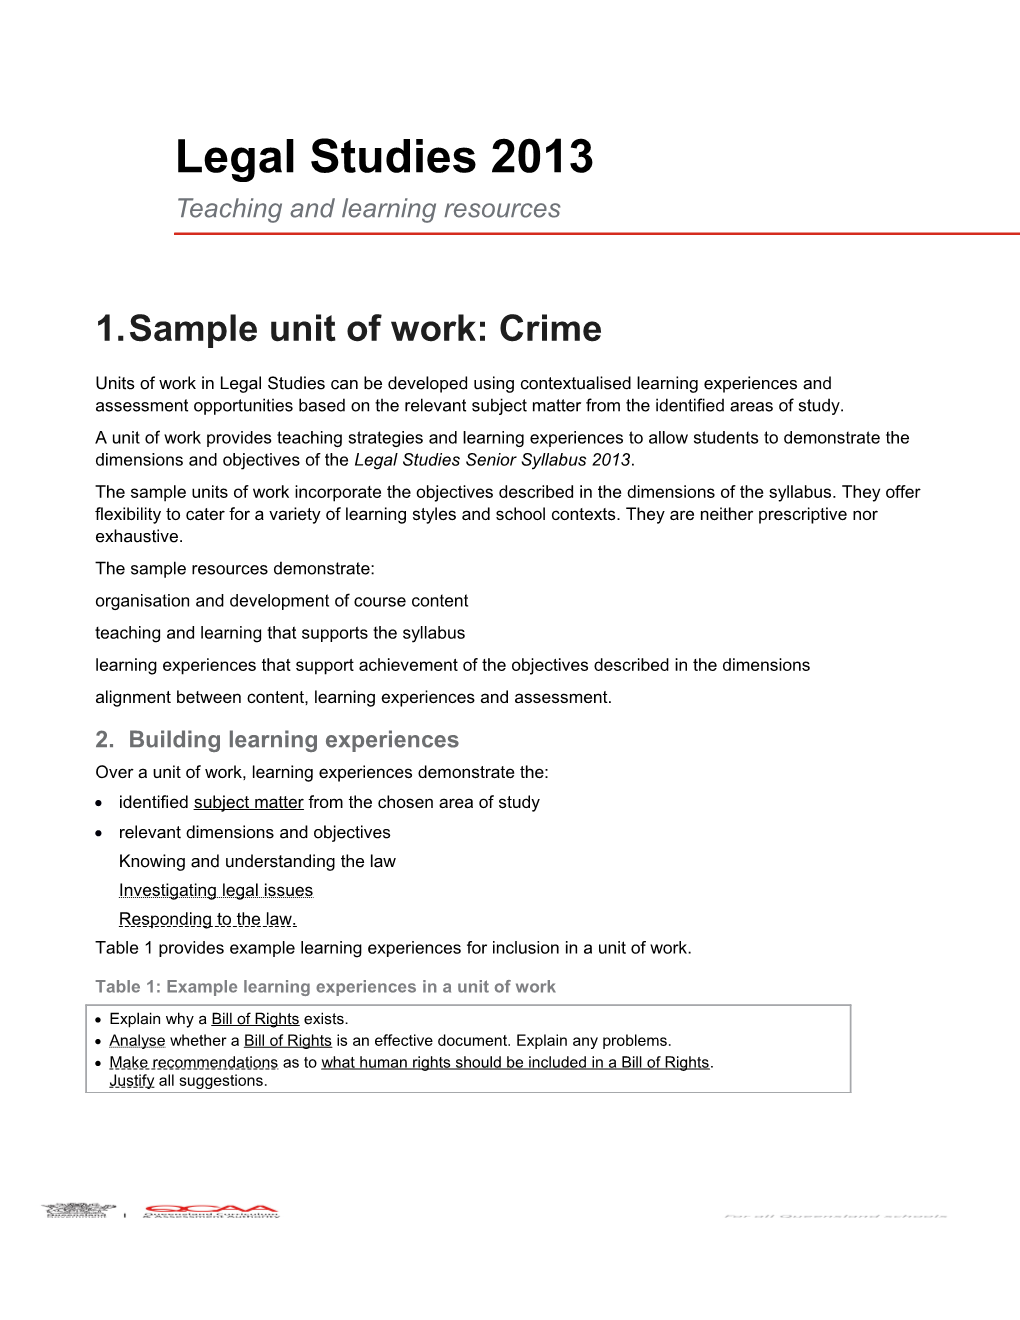 Legal Studies (2013) Teaching and Learning Resources: Sample Unit of Work - Crime